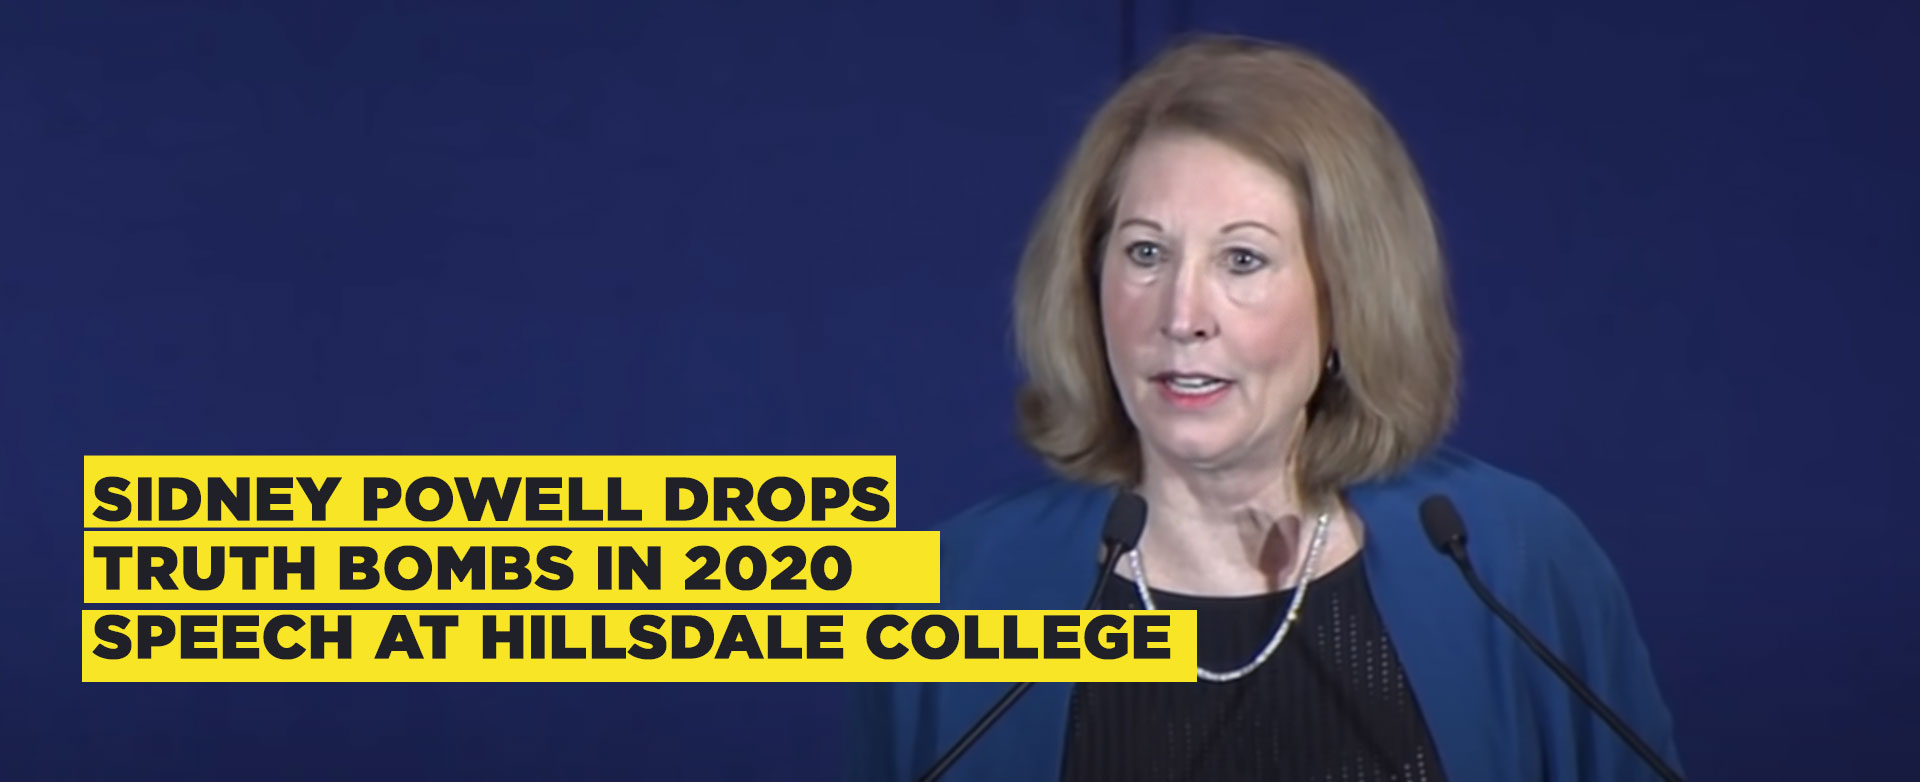 MyPatriotsNetwork-CLASSIC! Sidney Powell Drops Truth Bombs In 2020 Speech At Hillsdale College